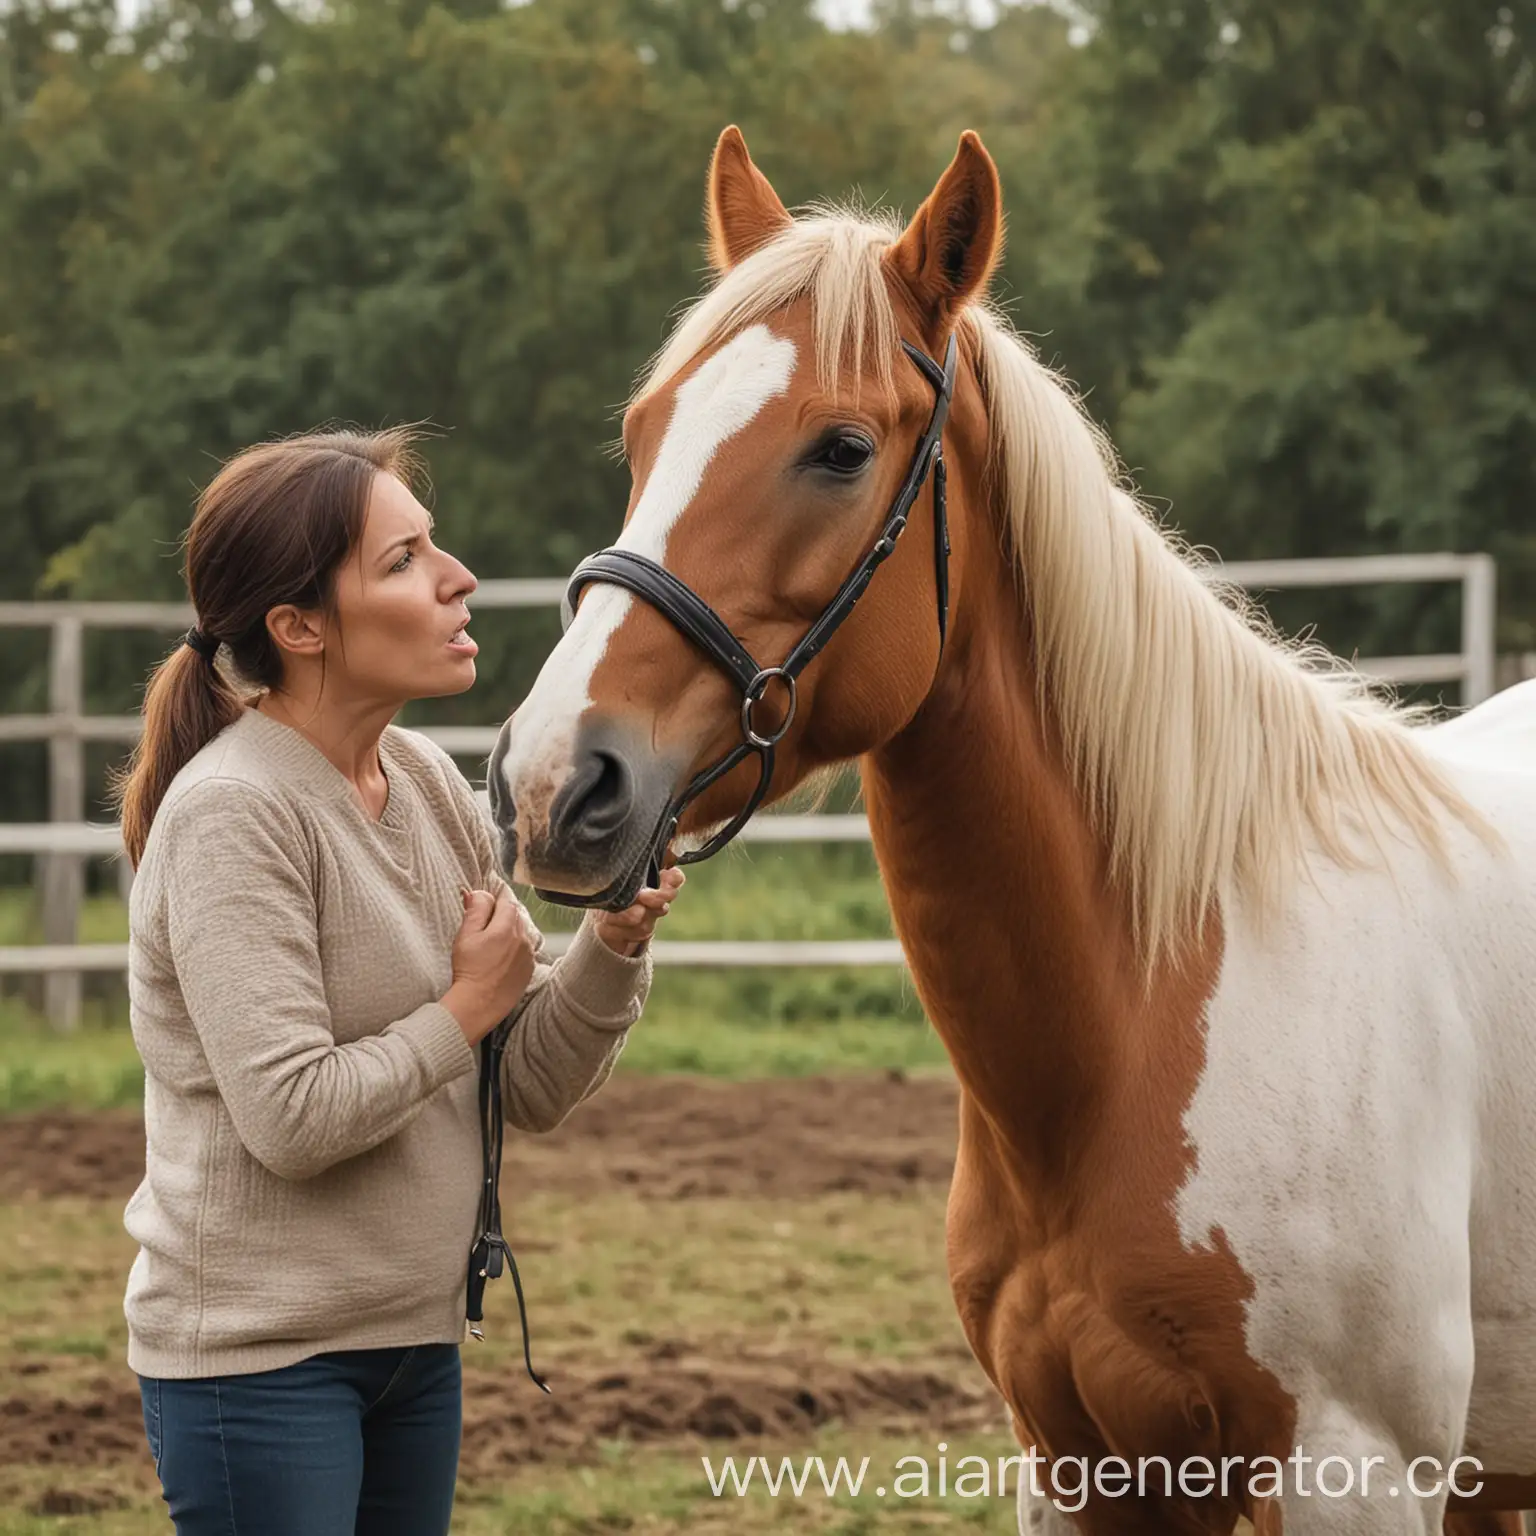 Mother-Reprimands-Her-Horse-in-a-Rustic-Stable-Setting